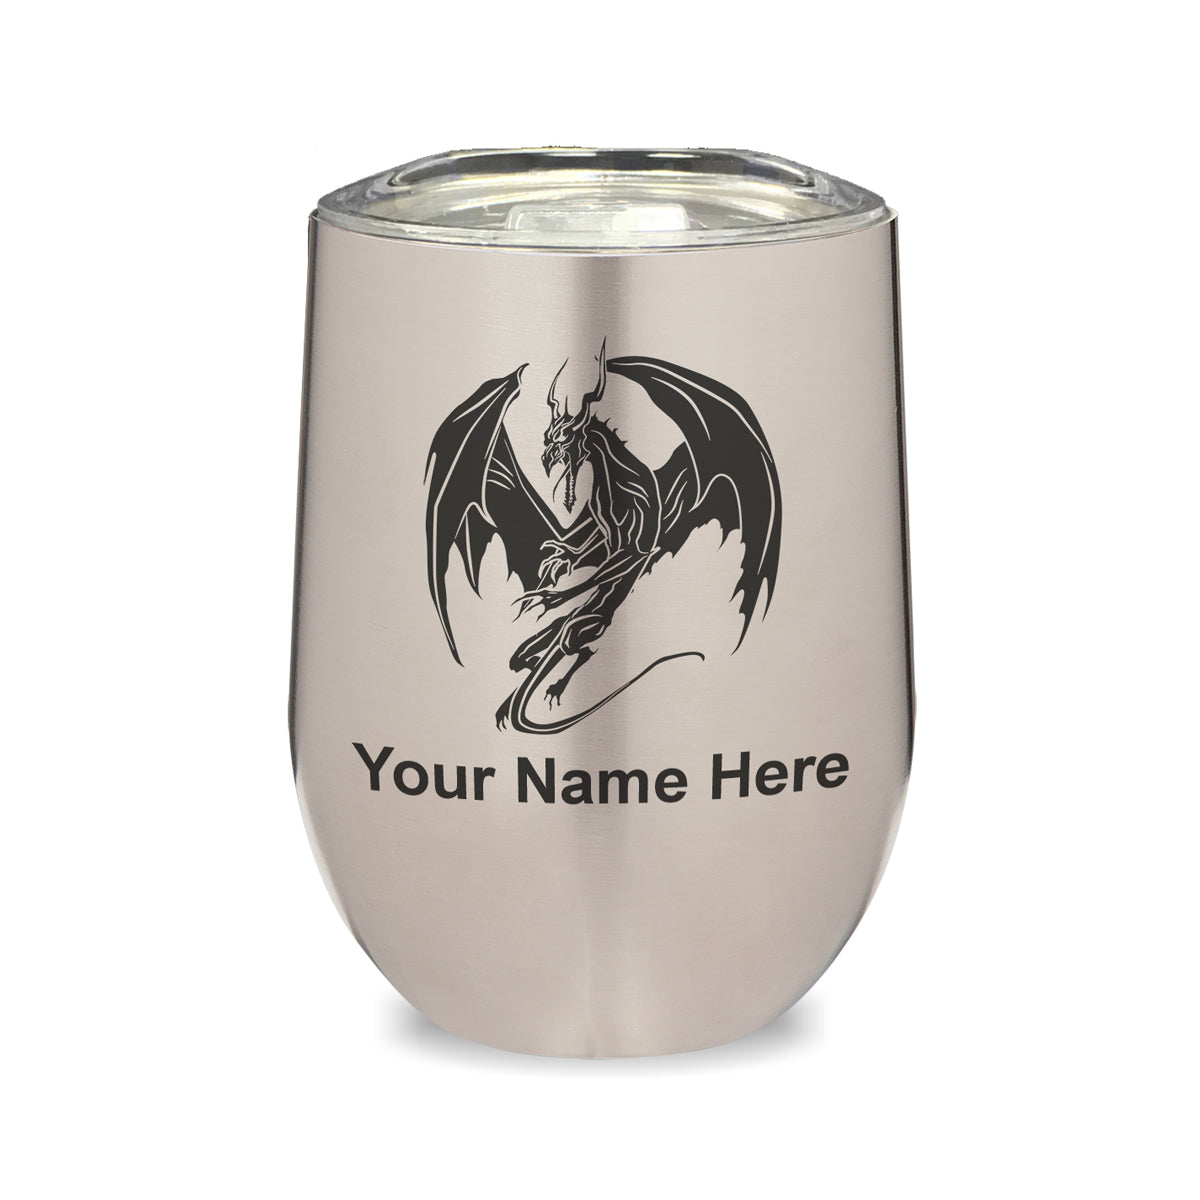 LaserGram Double Wall Stainless Steel Wine Glass, Dragon, Personalized Engraving Included